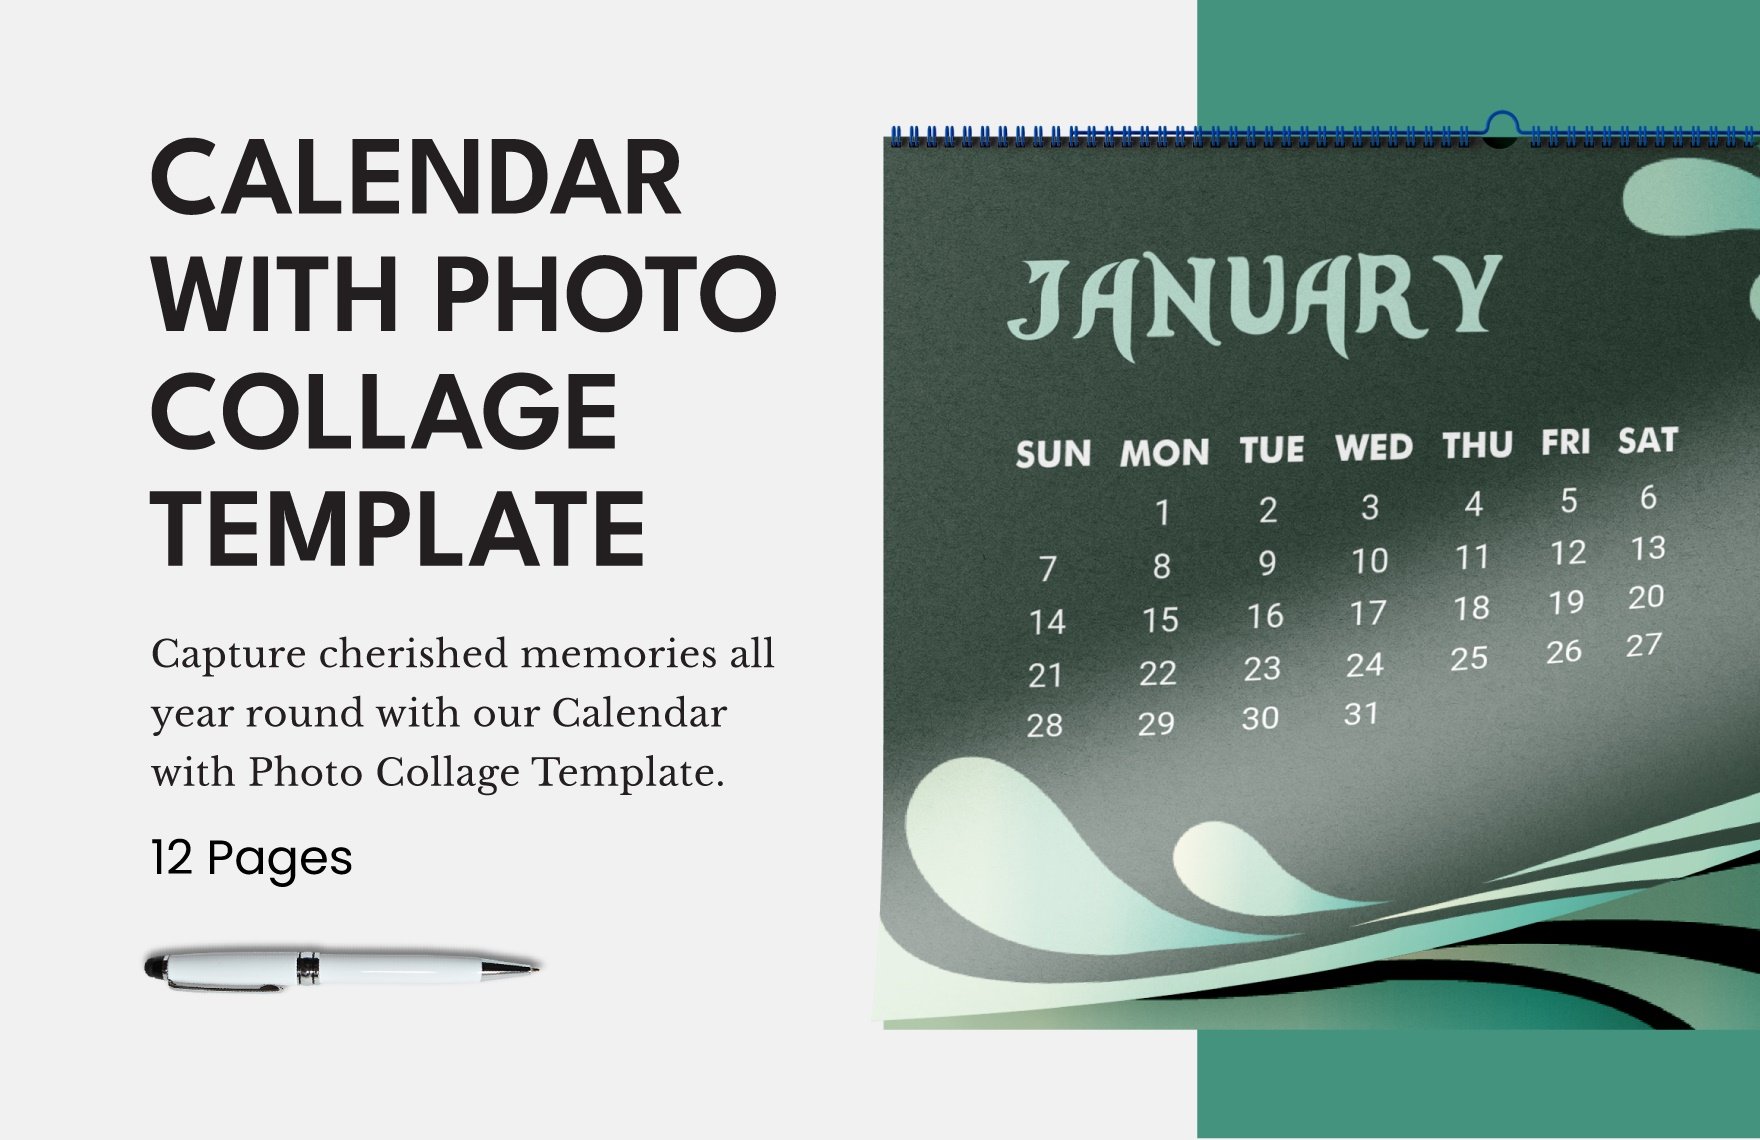 calendar-with-photo-collage-template